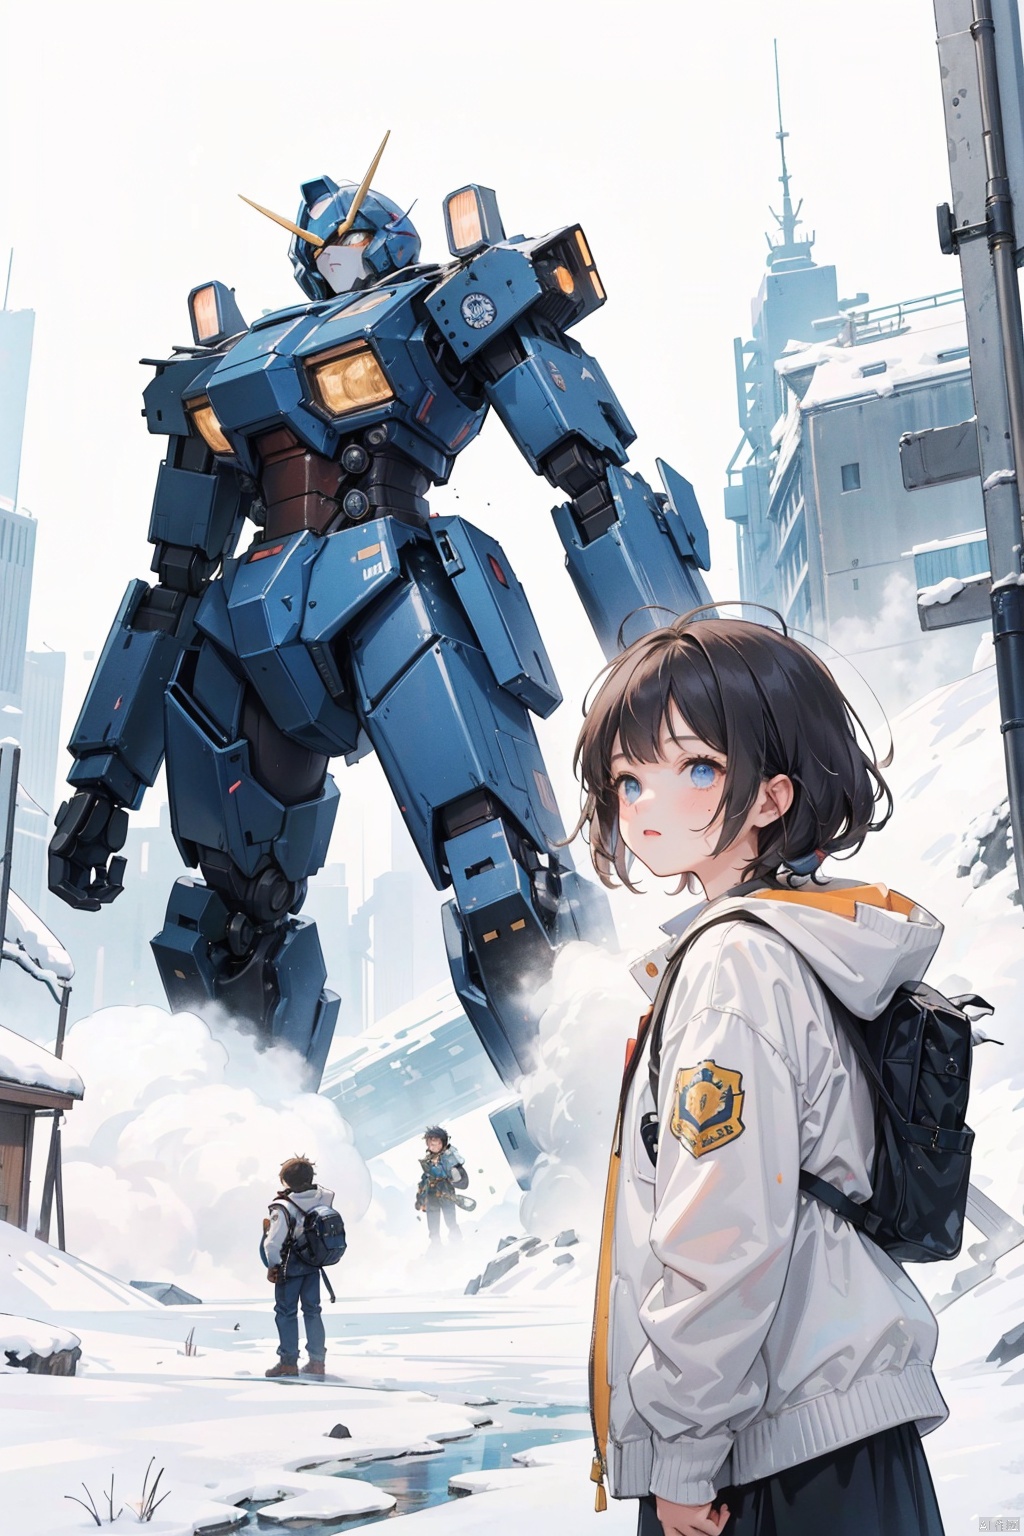 (A girl and a boy in the middle, with a giant mecha behind them, typesetting) (Snow Mountain) Spectacular, Cosmic, Combat, Mission, Belief, Peace, Ruins, Battle Damage, mecha destroyed, mecha shattered and incomplete, boy with injuries, Brave, Fighting